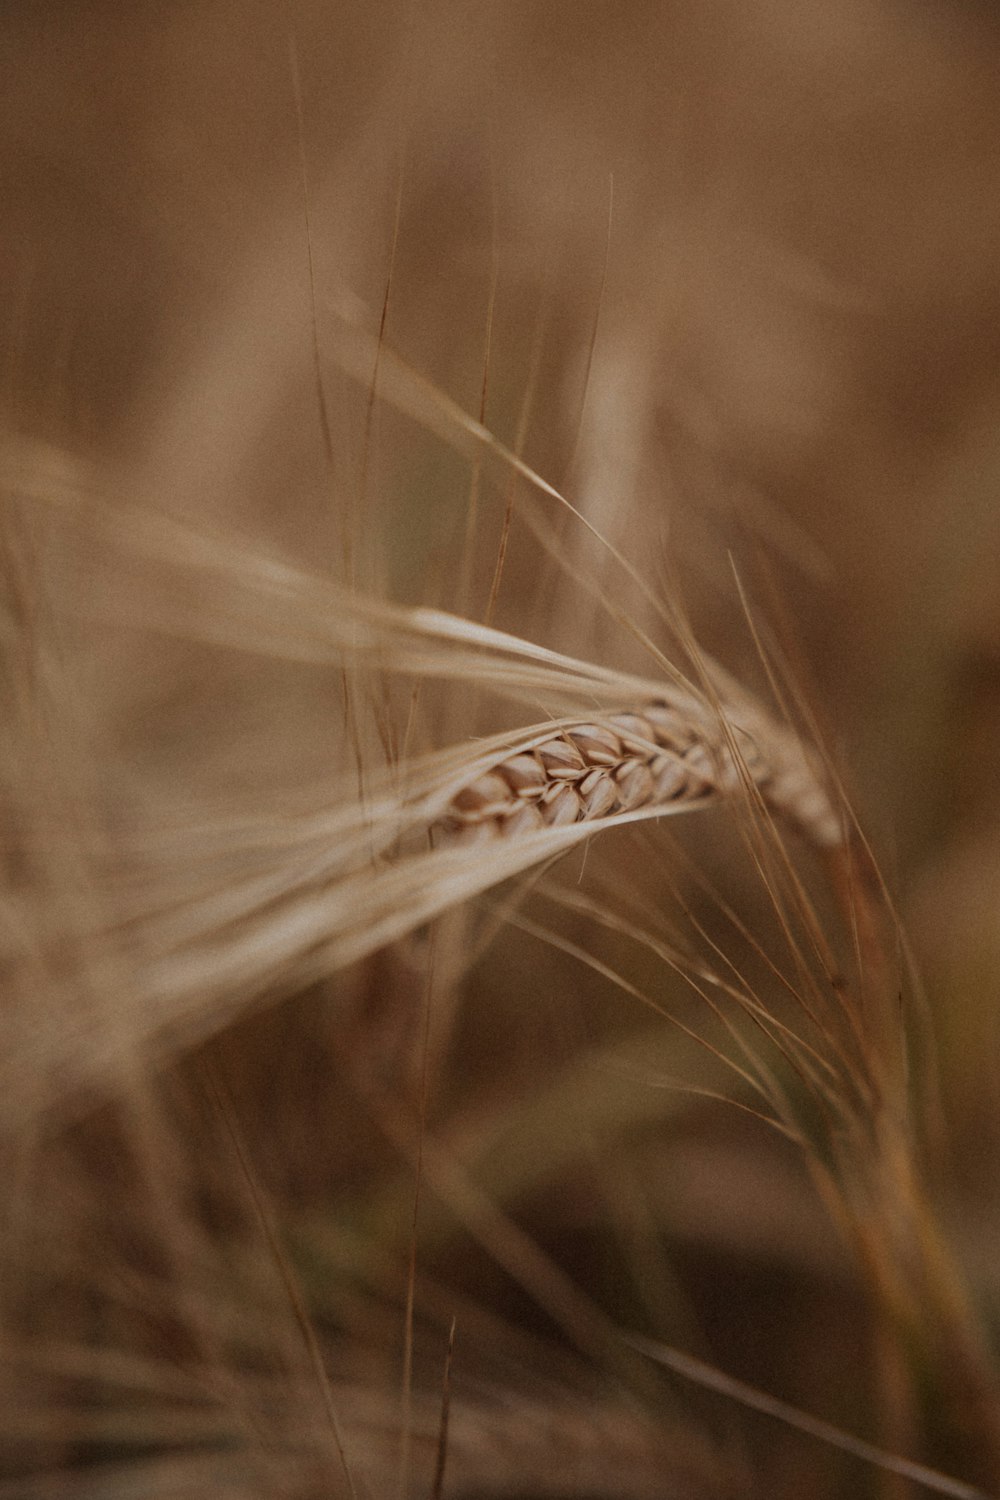 brown wheat in close up photography